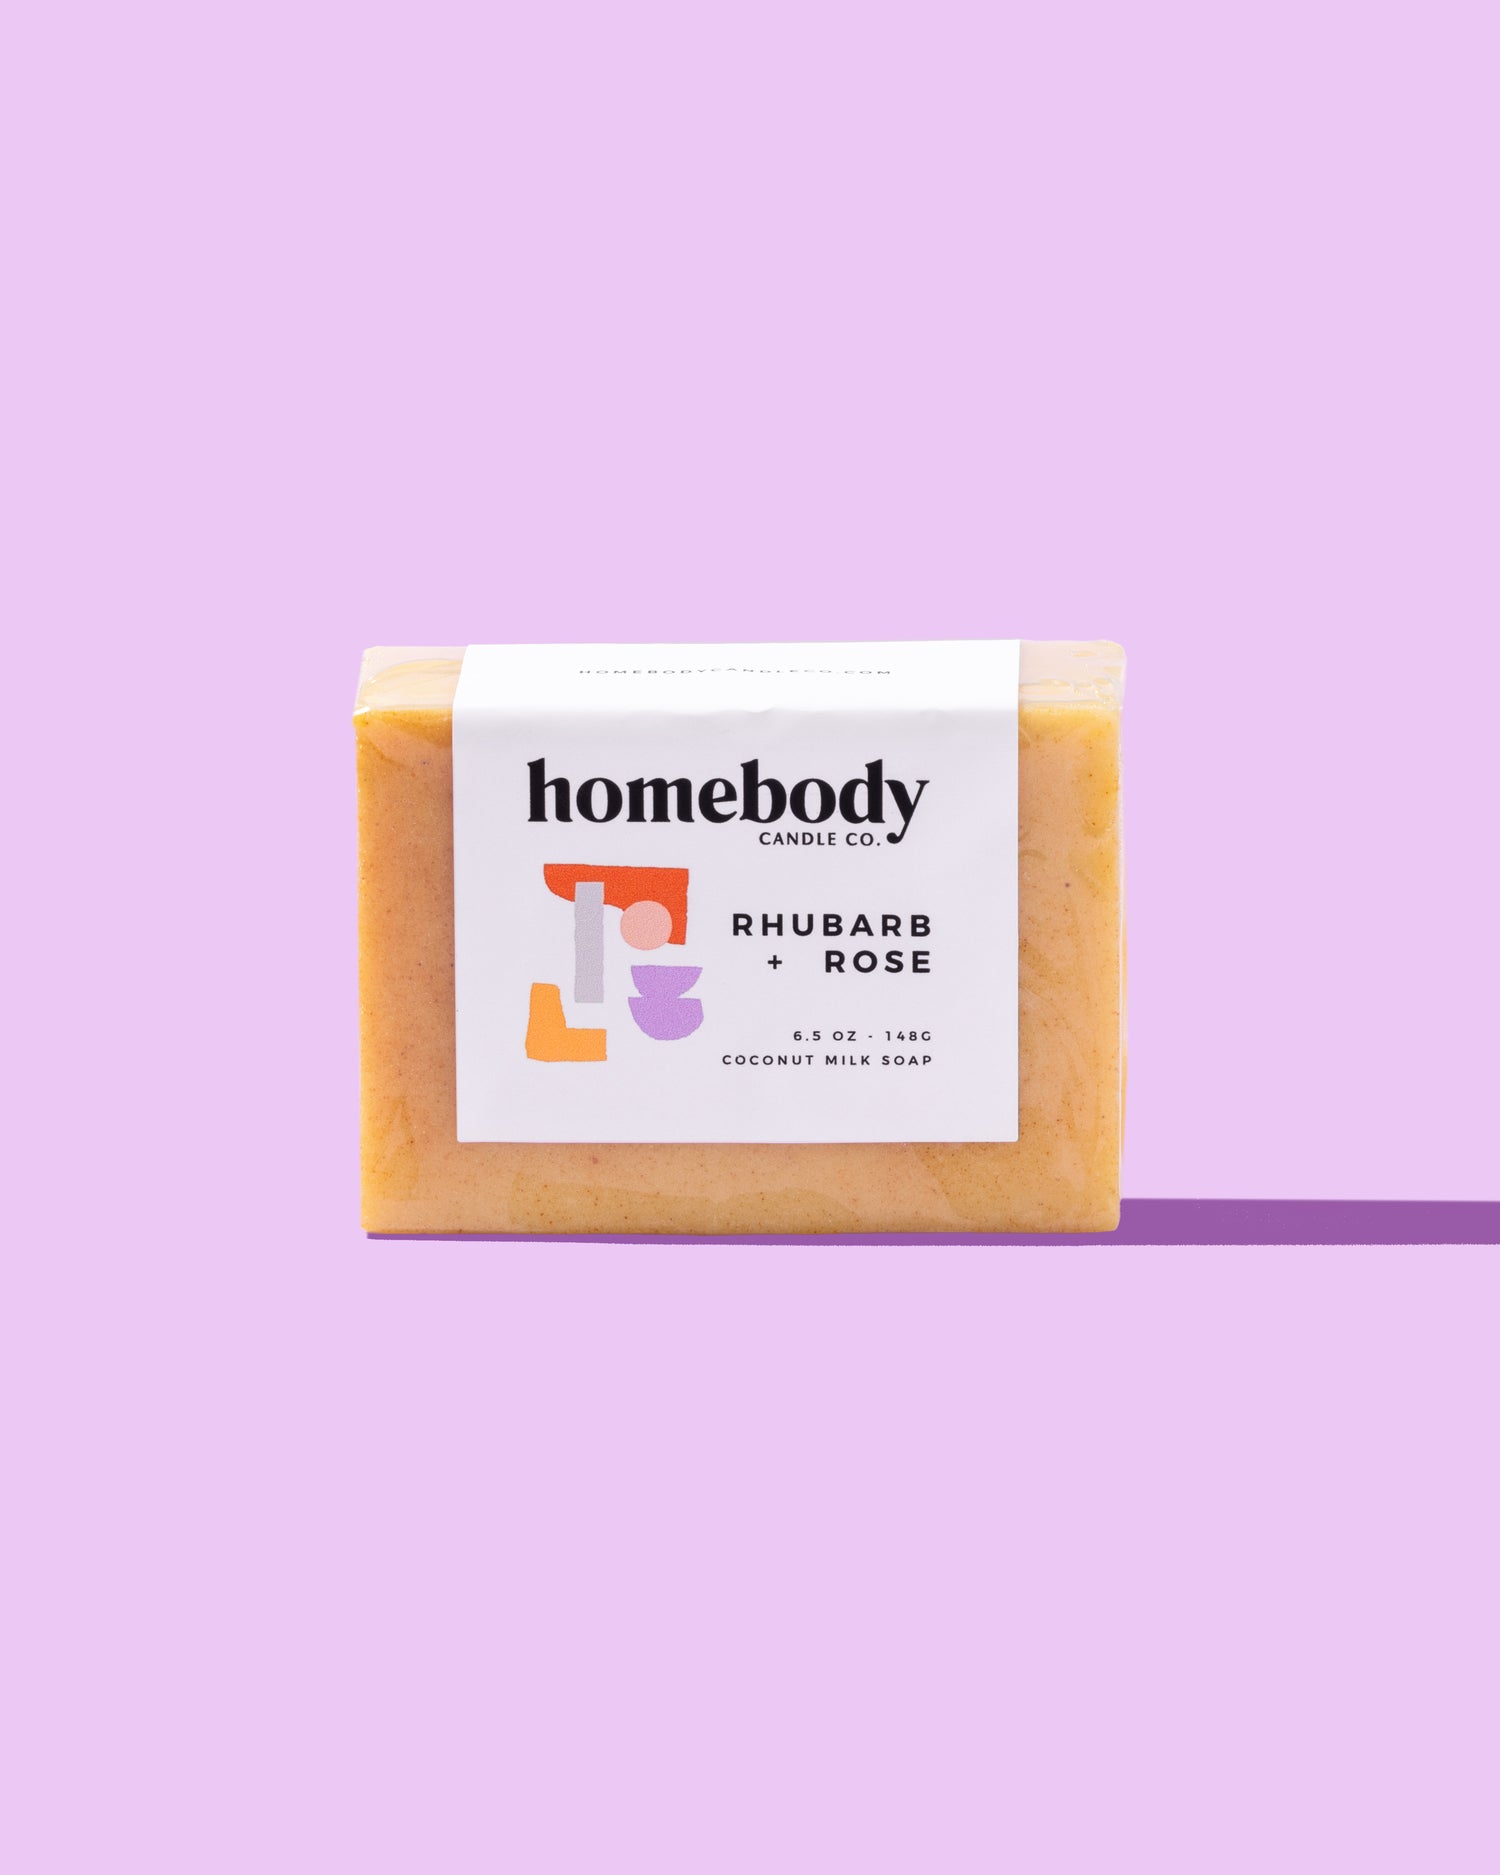 Rhubarb + Rose milk soap Homebody Candle Co